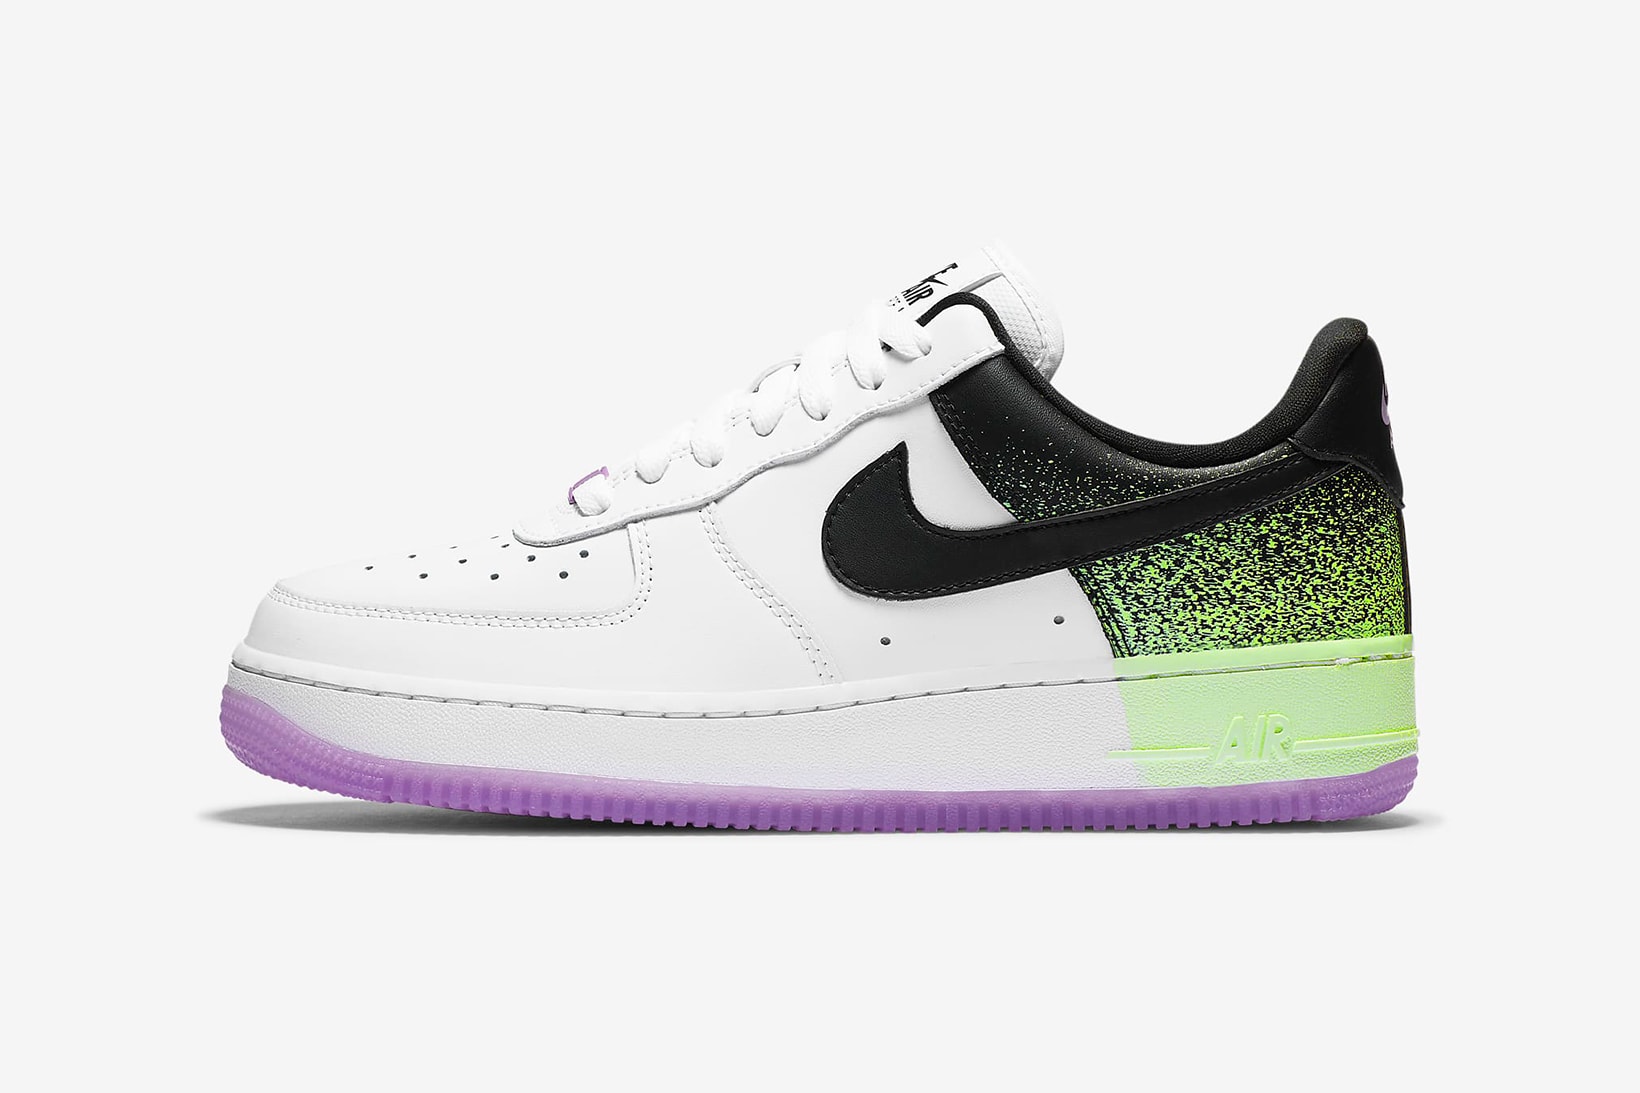 Nike Wmns Air Force 1 07 AF1 White Action Green Women Casual Shoes